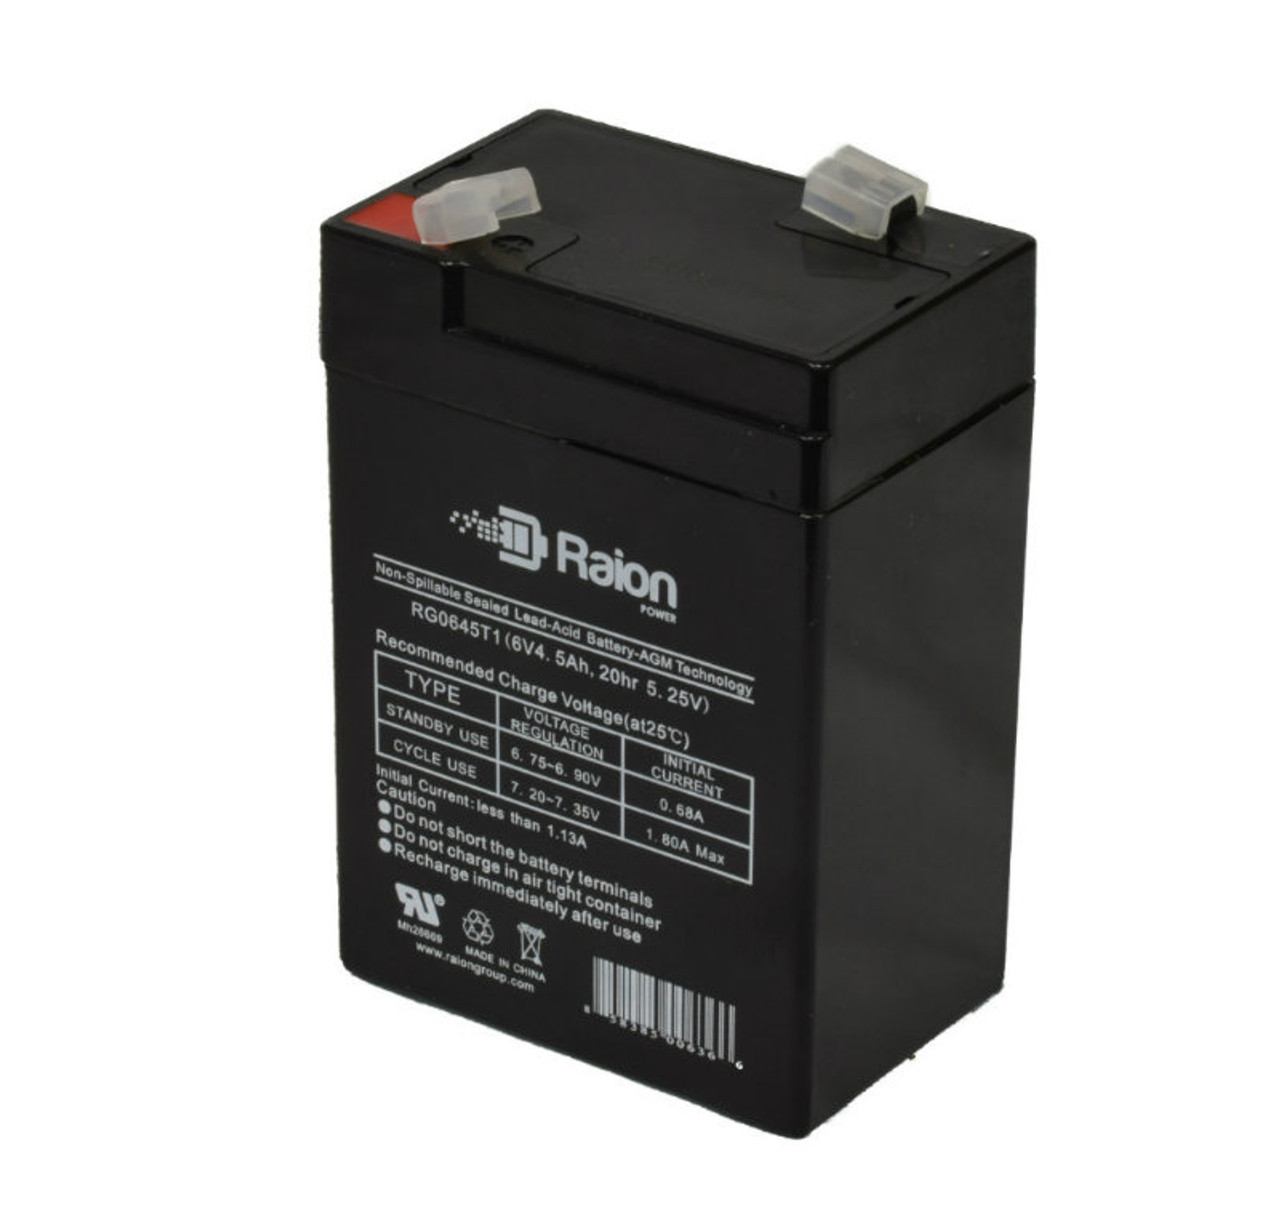 Raion Power RG0645T1 6V 4.5Ah Replacement Battery Cartridge for Teledyne 2CL6S5